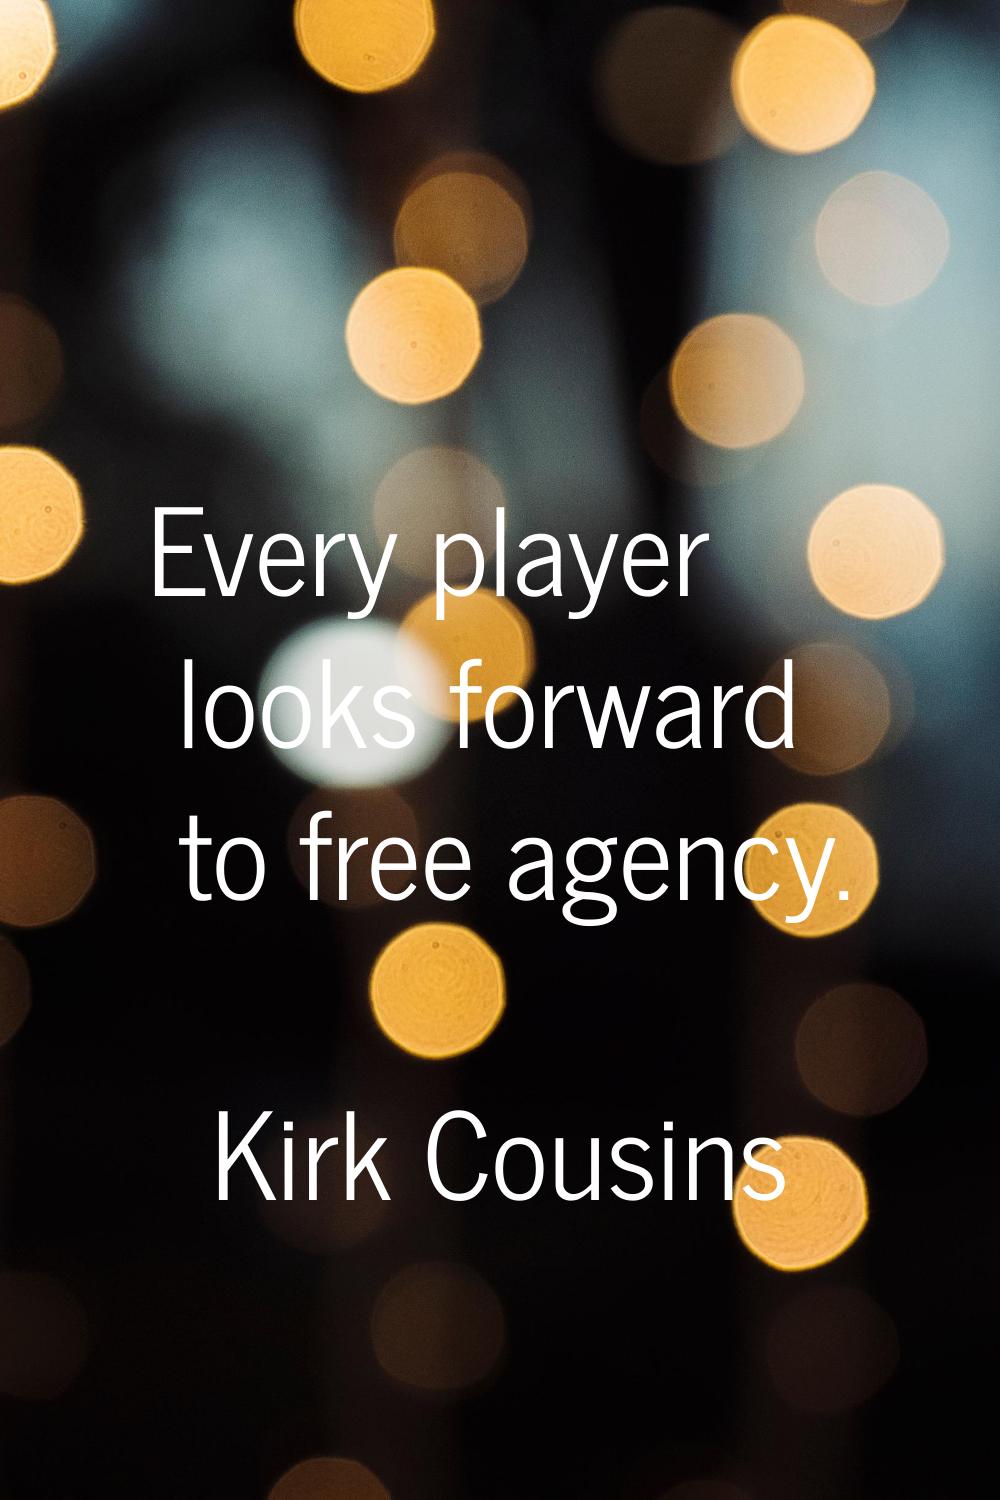 Every player looks forward to free agency.